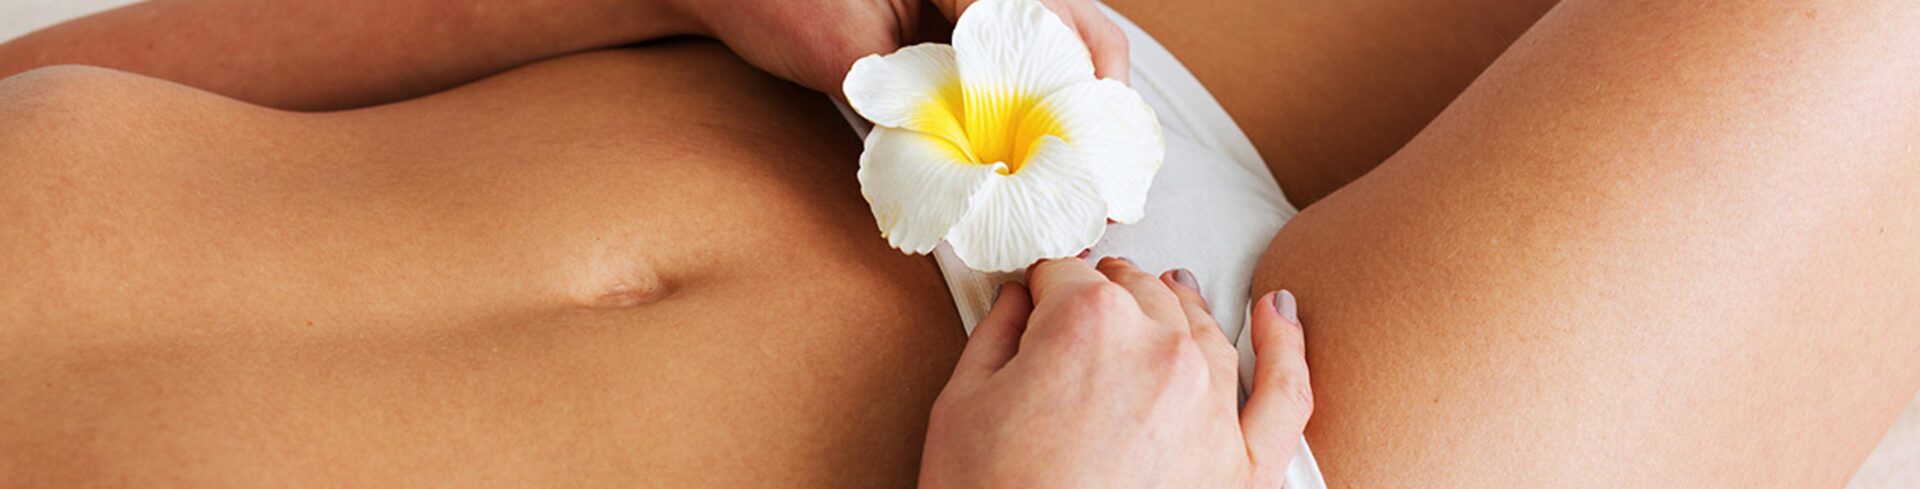 Female intimate waxing